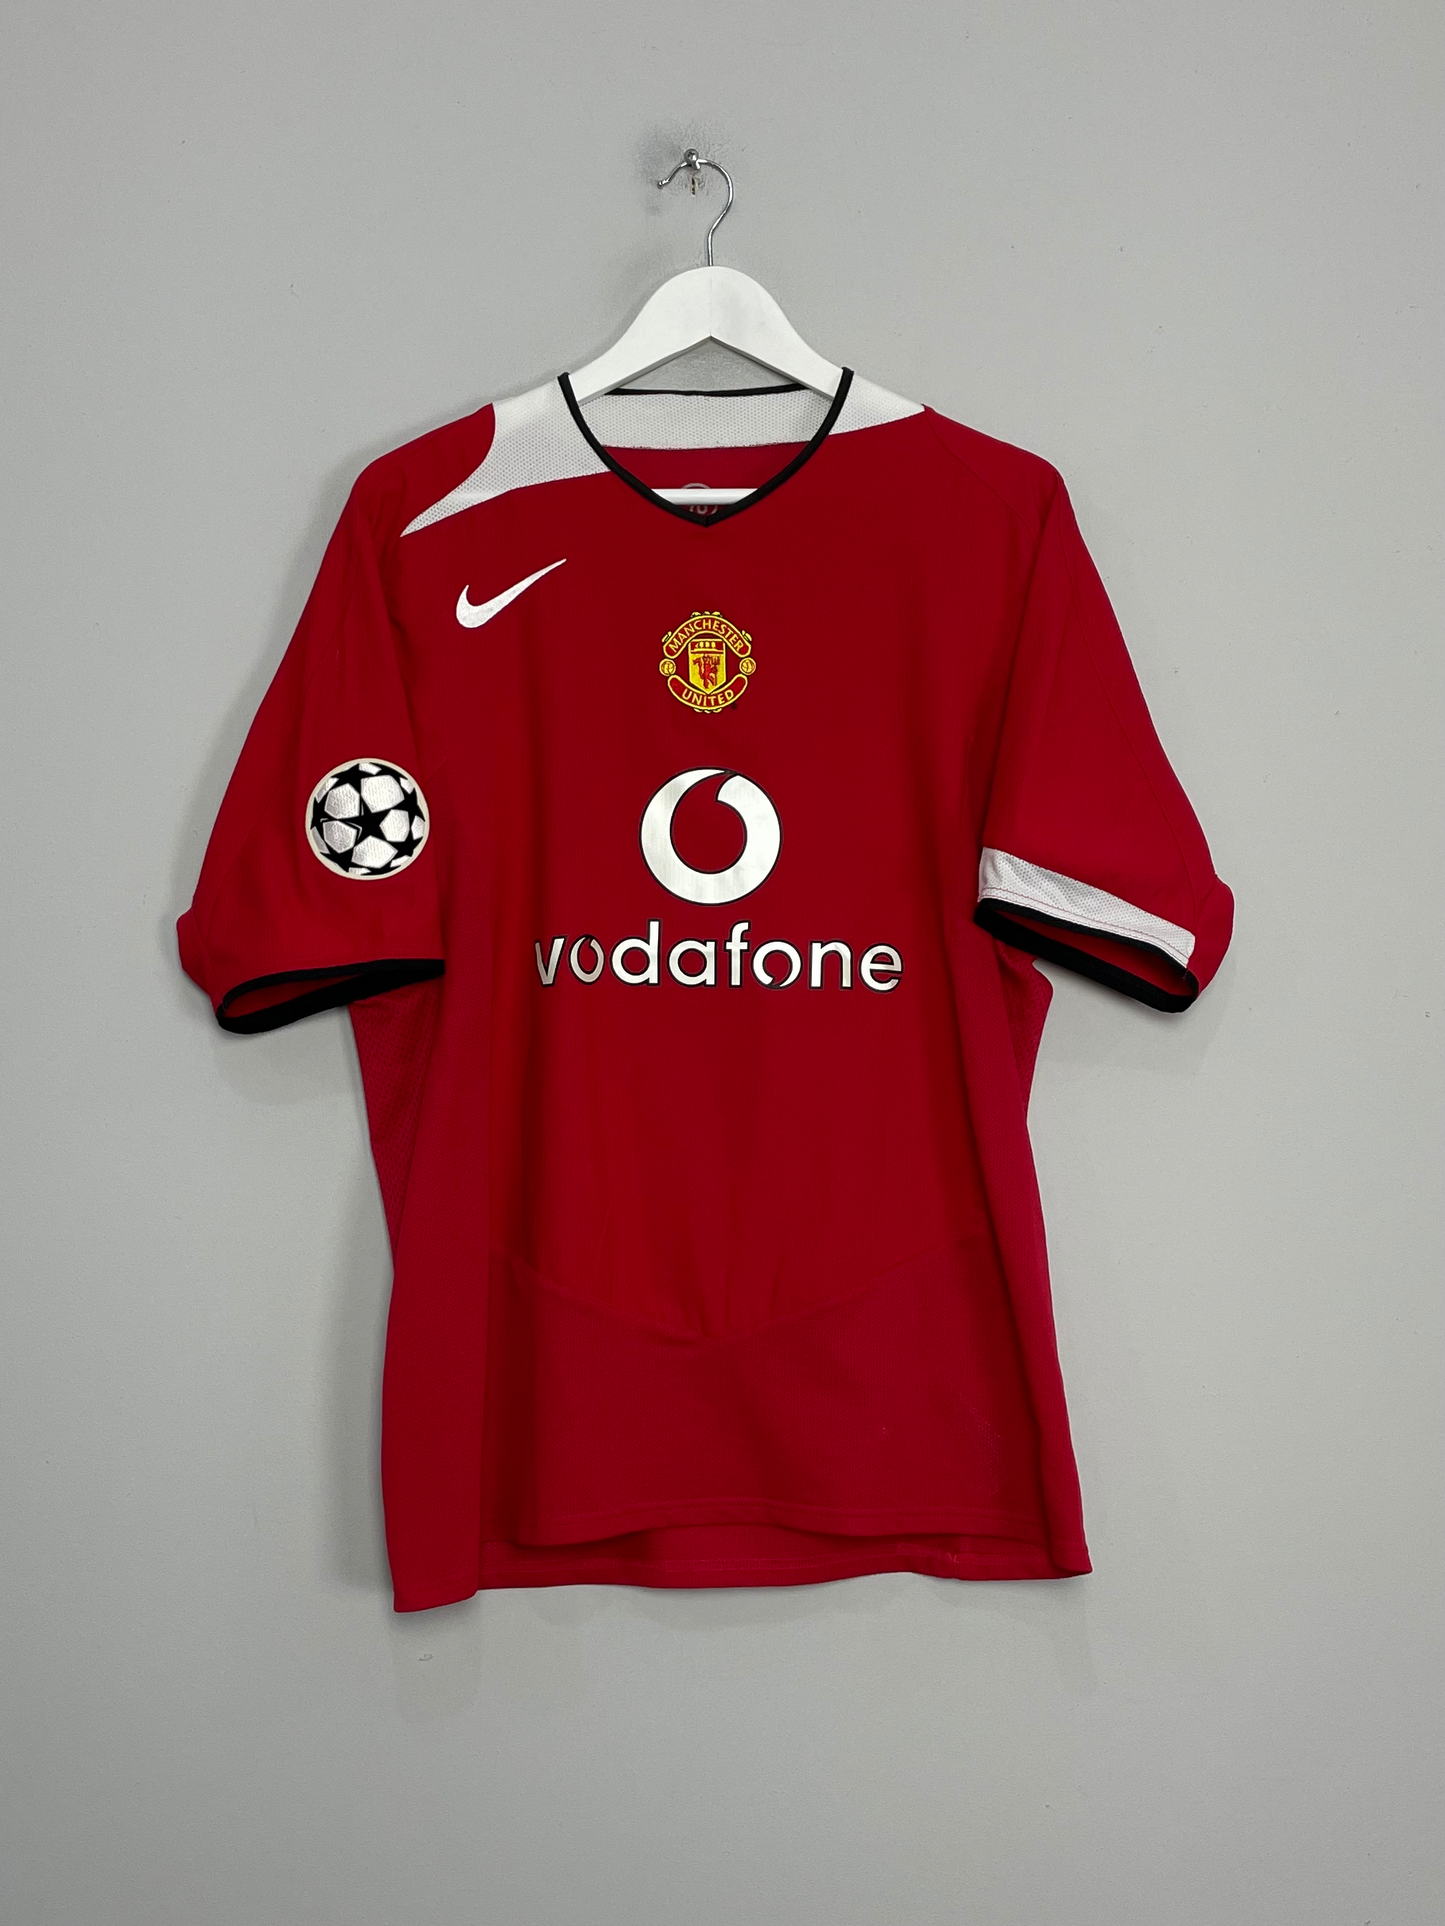 2004/06 MANCHESTER UNITED SMITH #14 C/L HOME SHIRT (L) NIKE